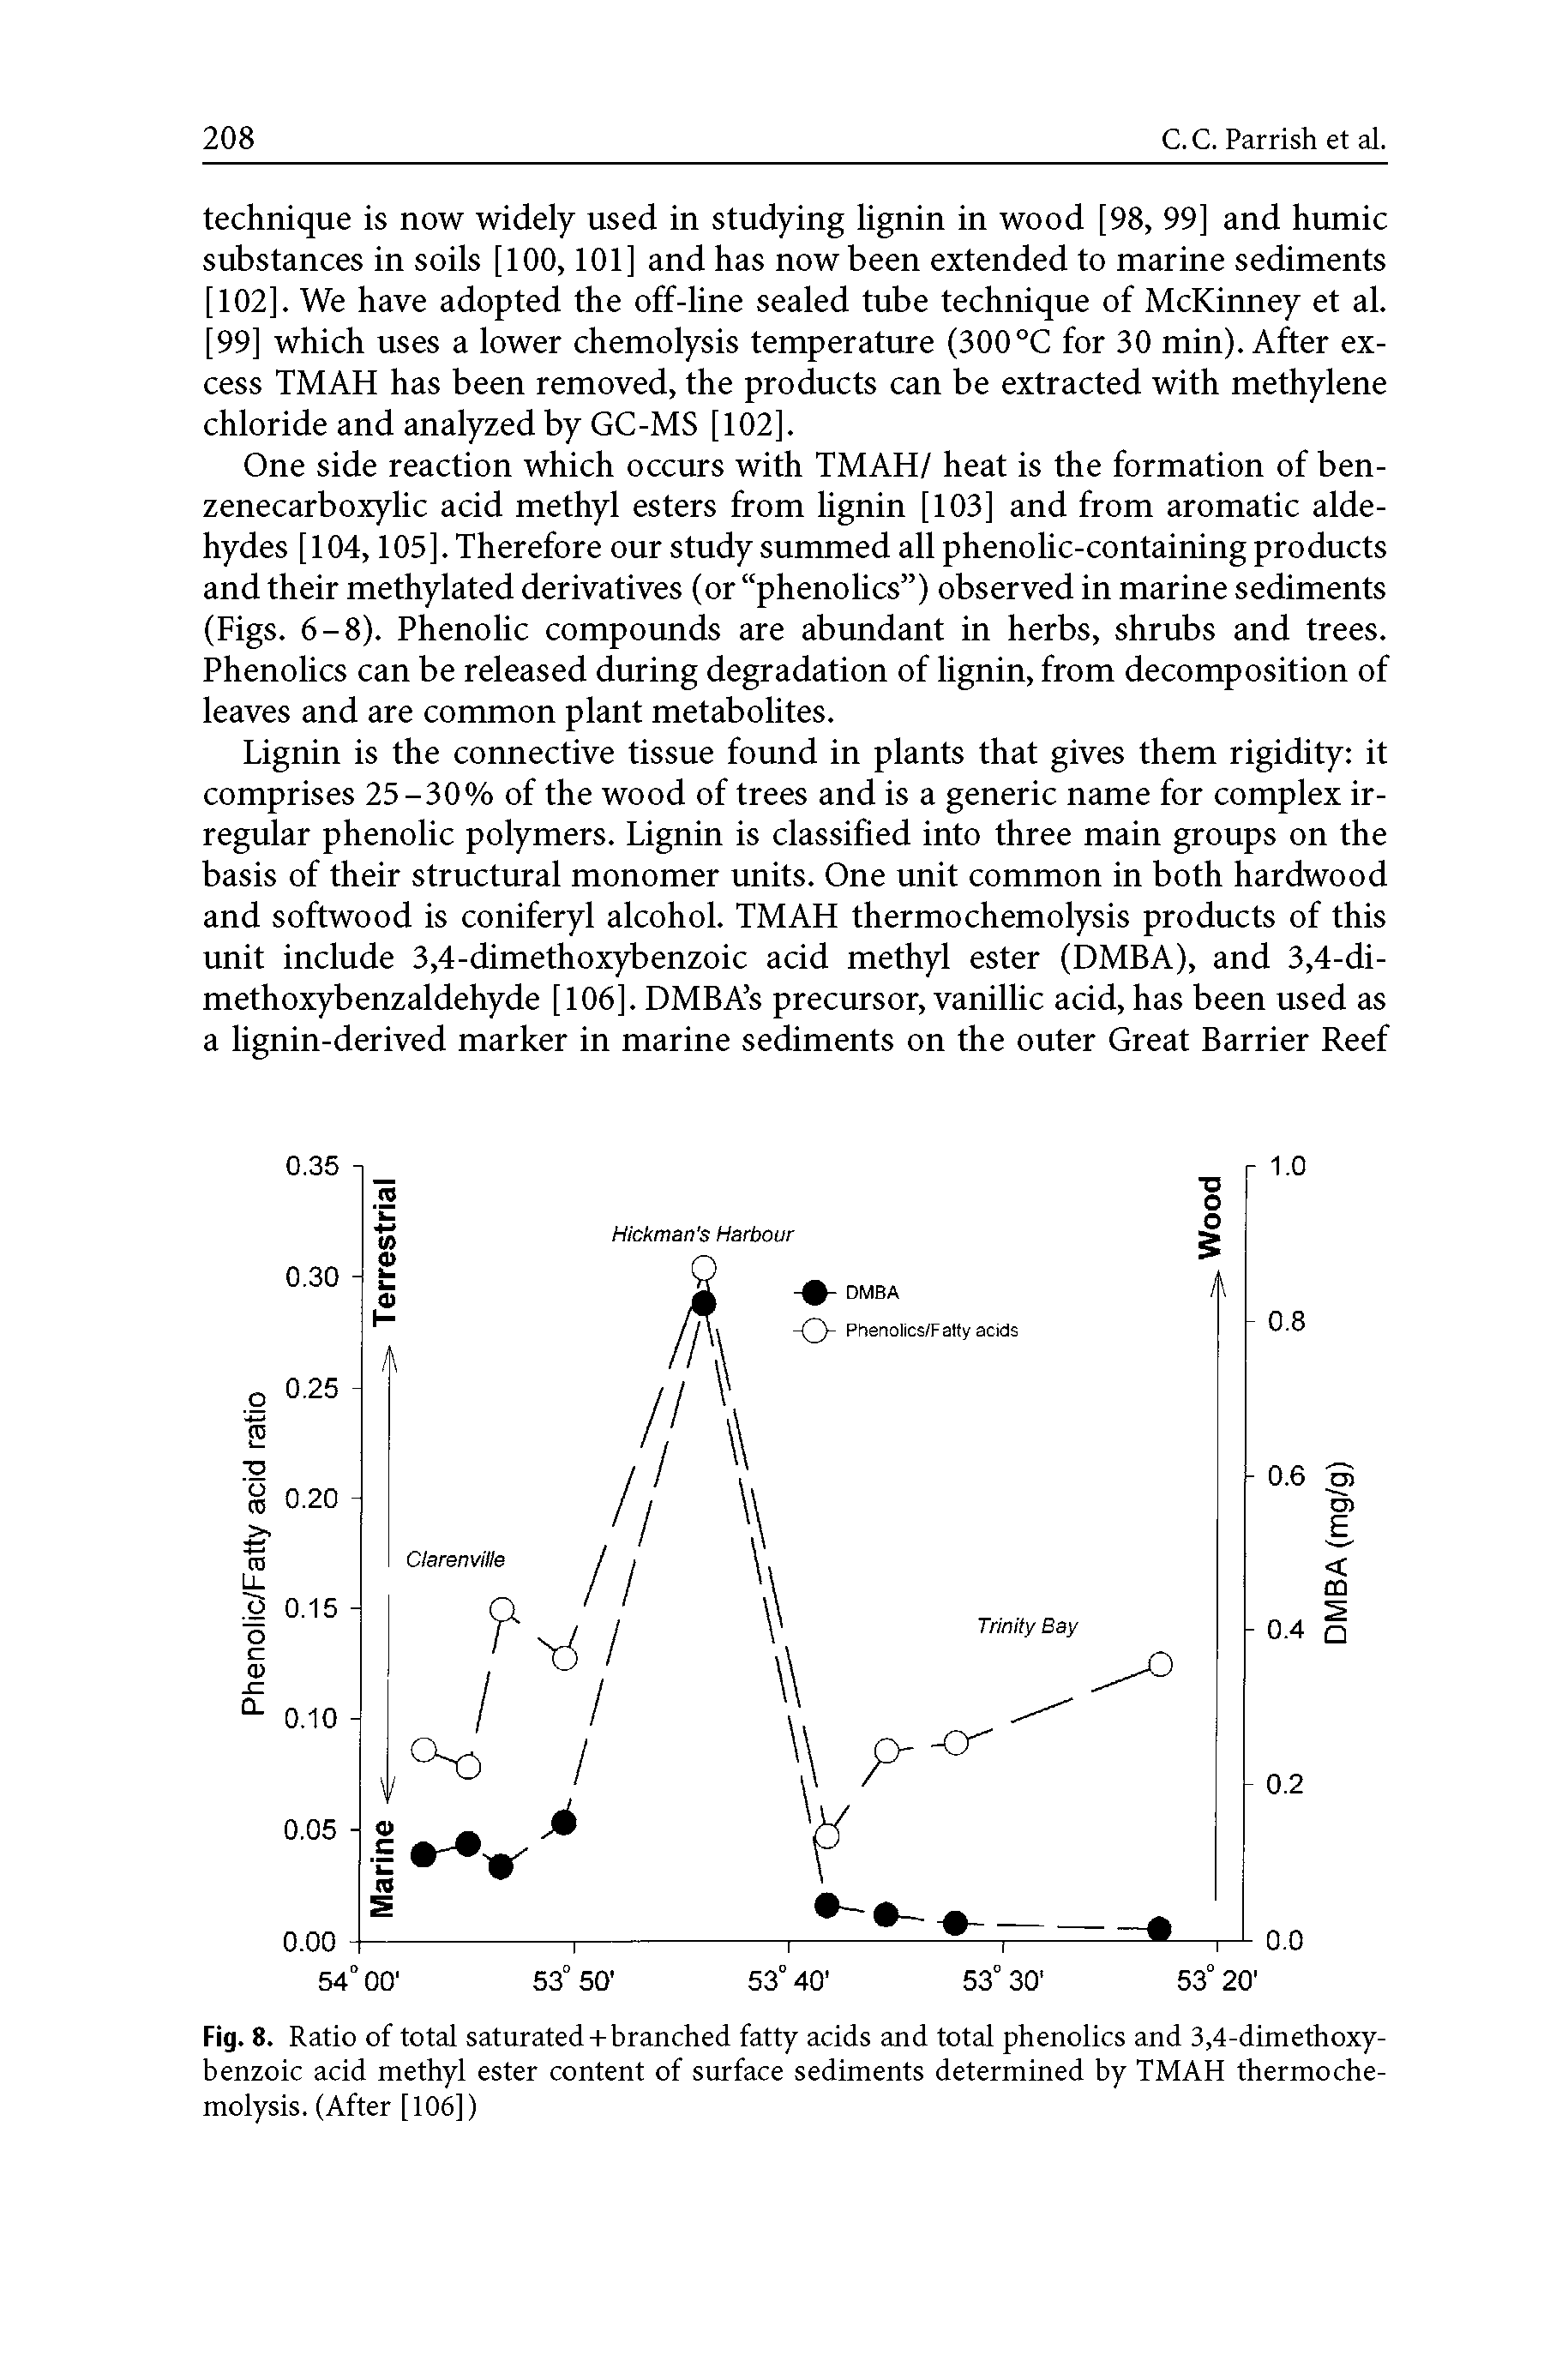 Fig. 8. Ratio of total saturated + branched fatty acids and total phenolics and 3,4-dim ethoxy-benzoic acid methyl ester content of surface sediments determined by TMAH thermoche-molysis. (After [106])...